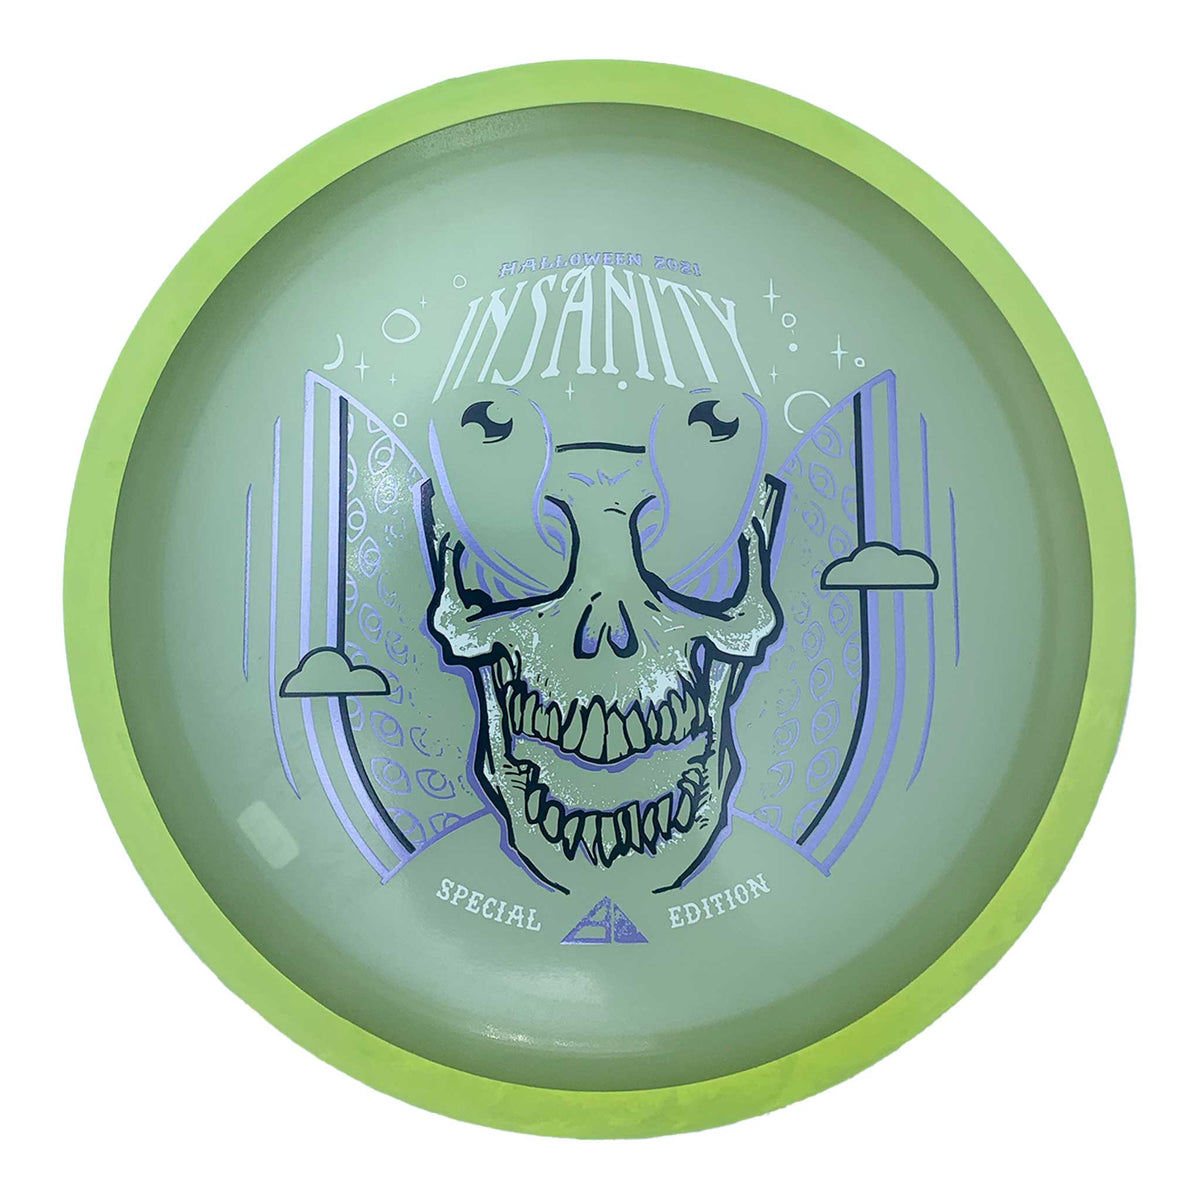 Axiom Discs Eclipse 2.0 Glow Insanity Halloween 2021 Special Edition distance driver - Yellow